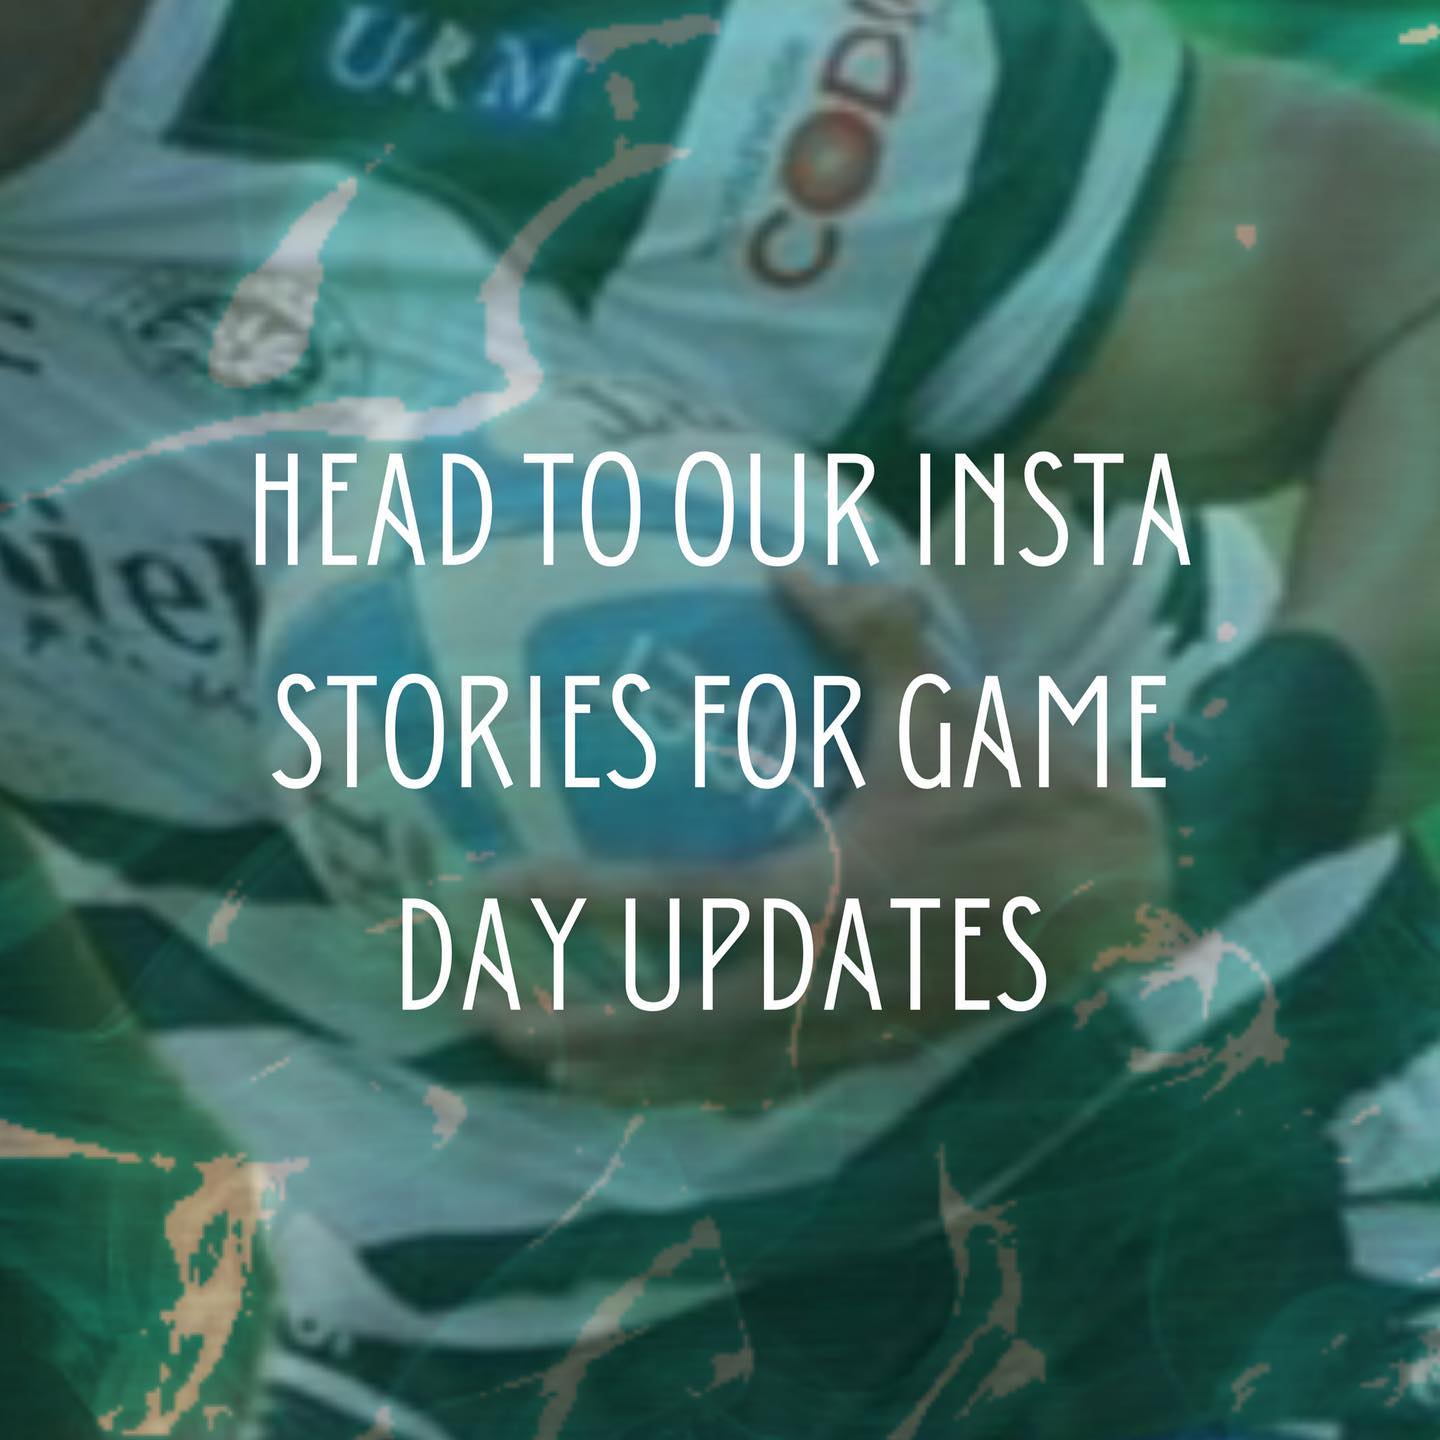 All half time and full time scores will be shared on our Instagram Stories today...